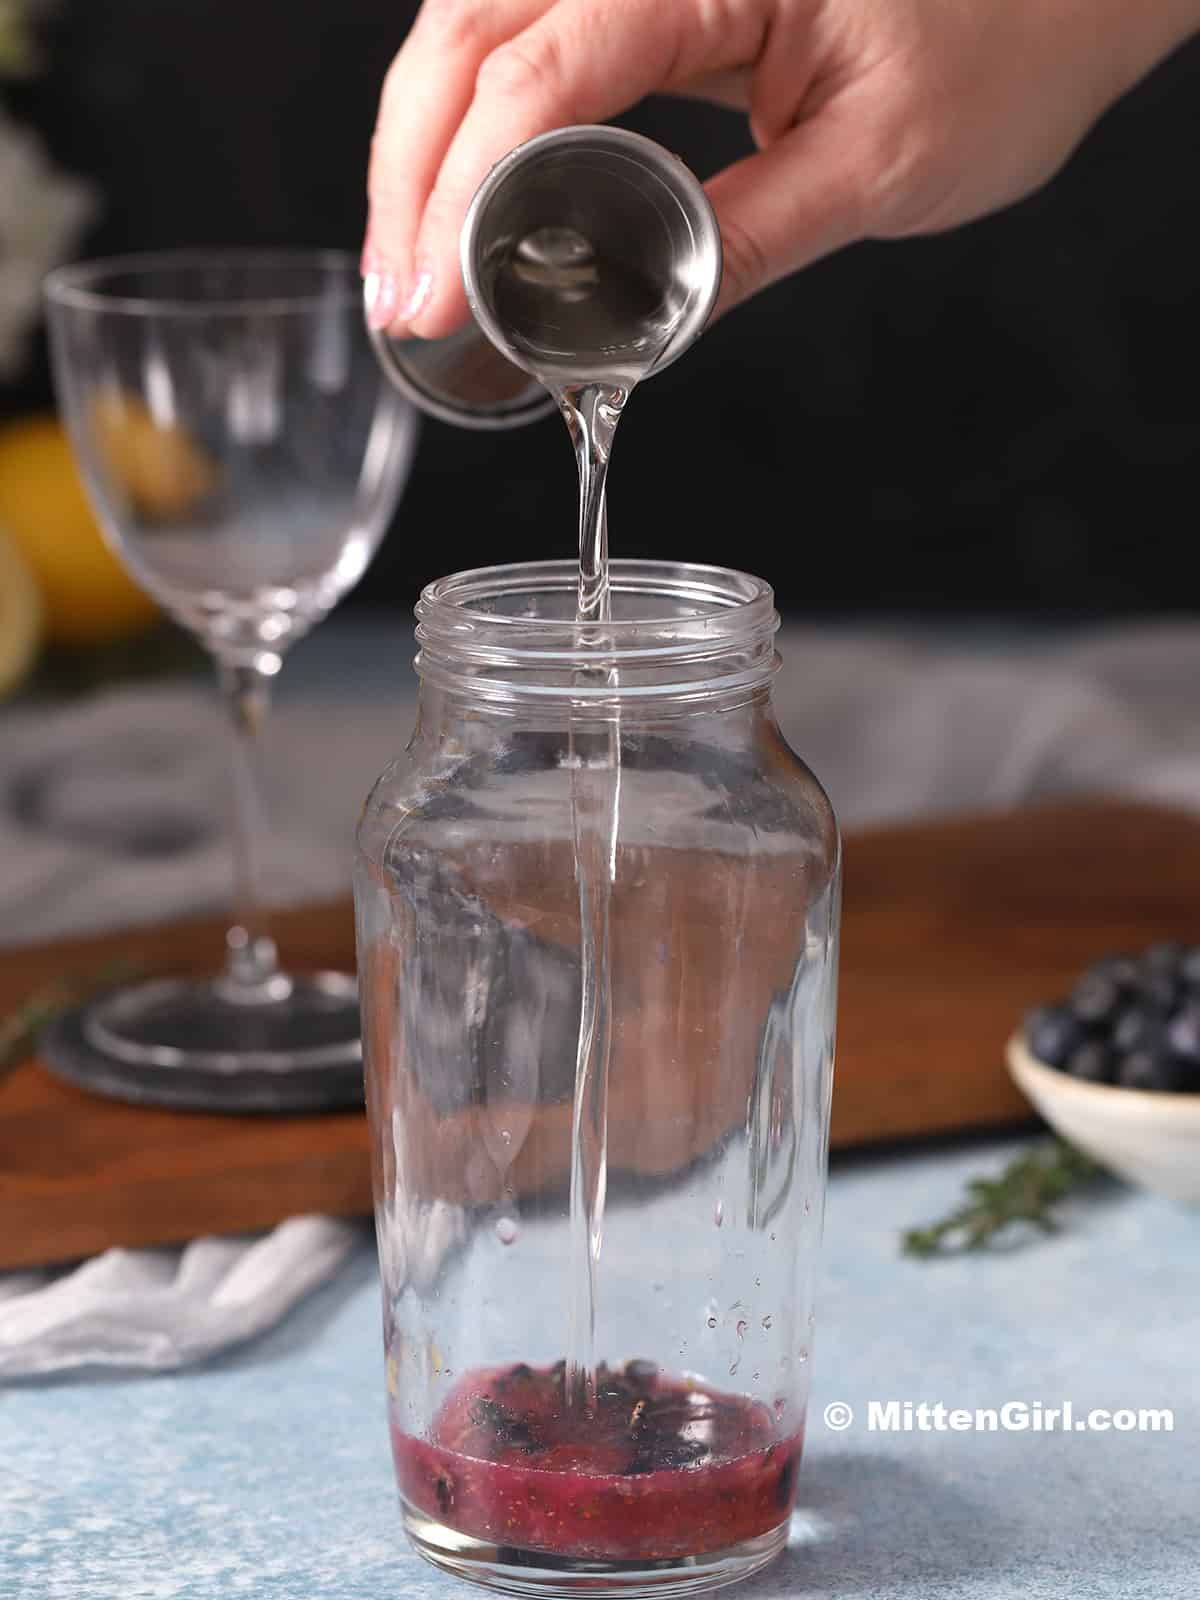 Lavender syrup being poured into a cocktail shaker.